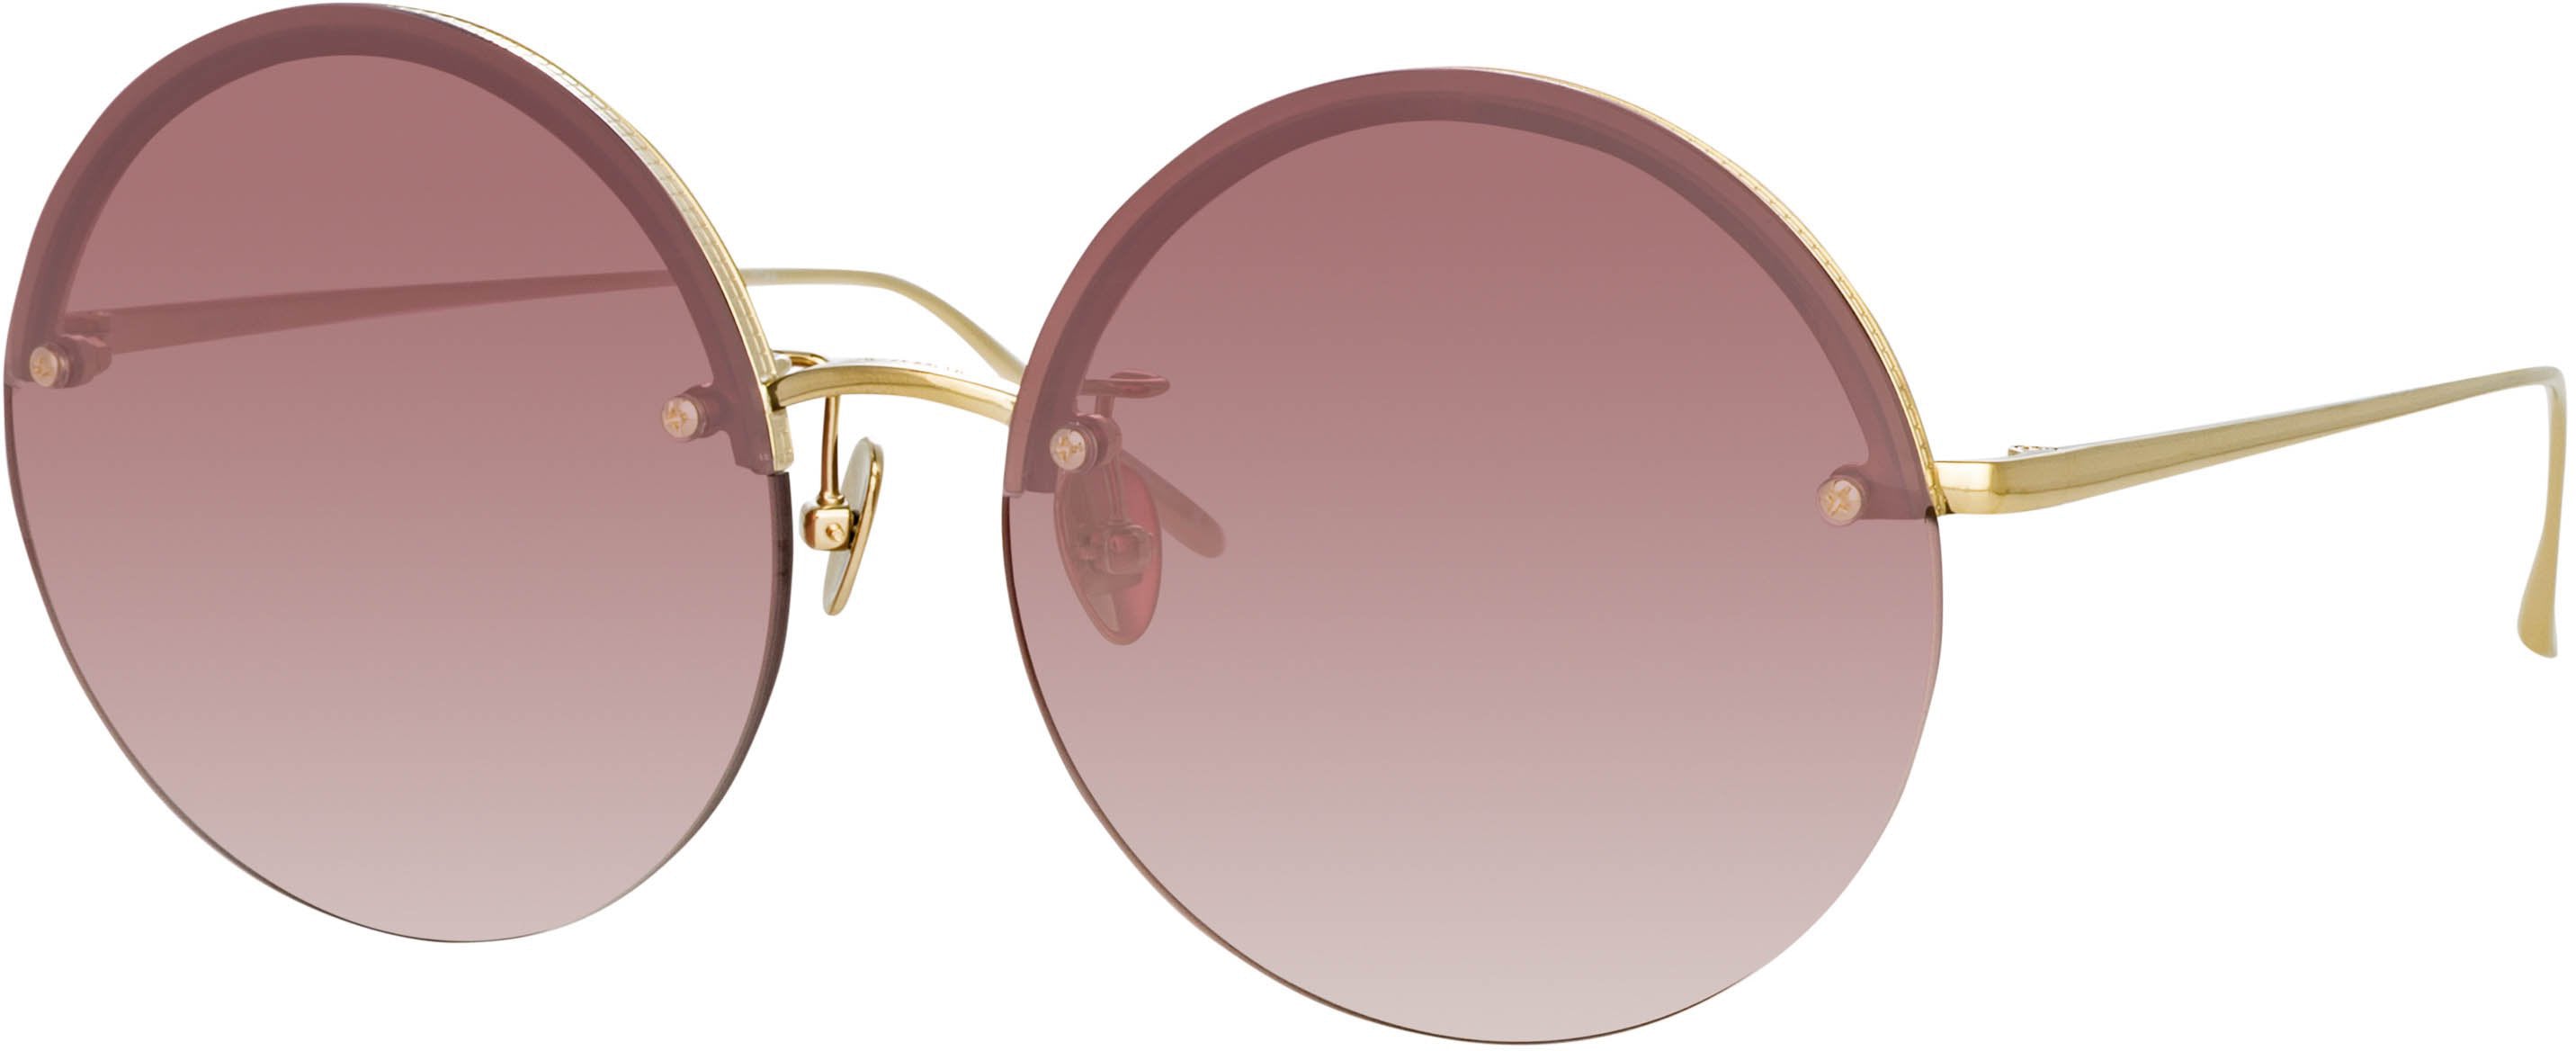 Color_LFL1097C5SUN - Adrienne Round Sunglasses in Light Gold and Burgundy